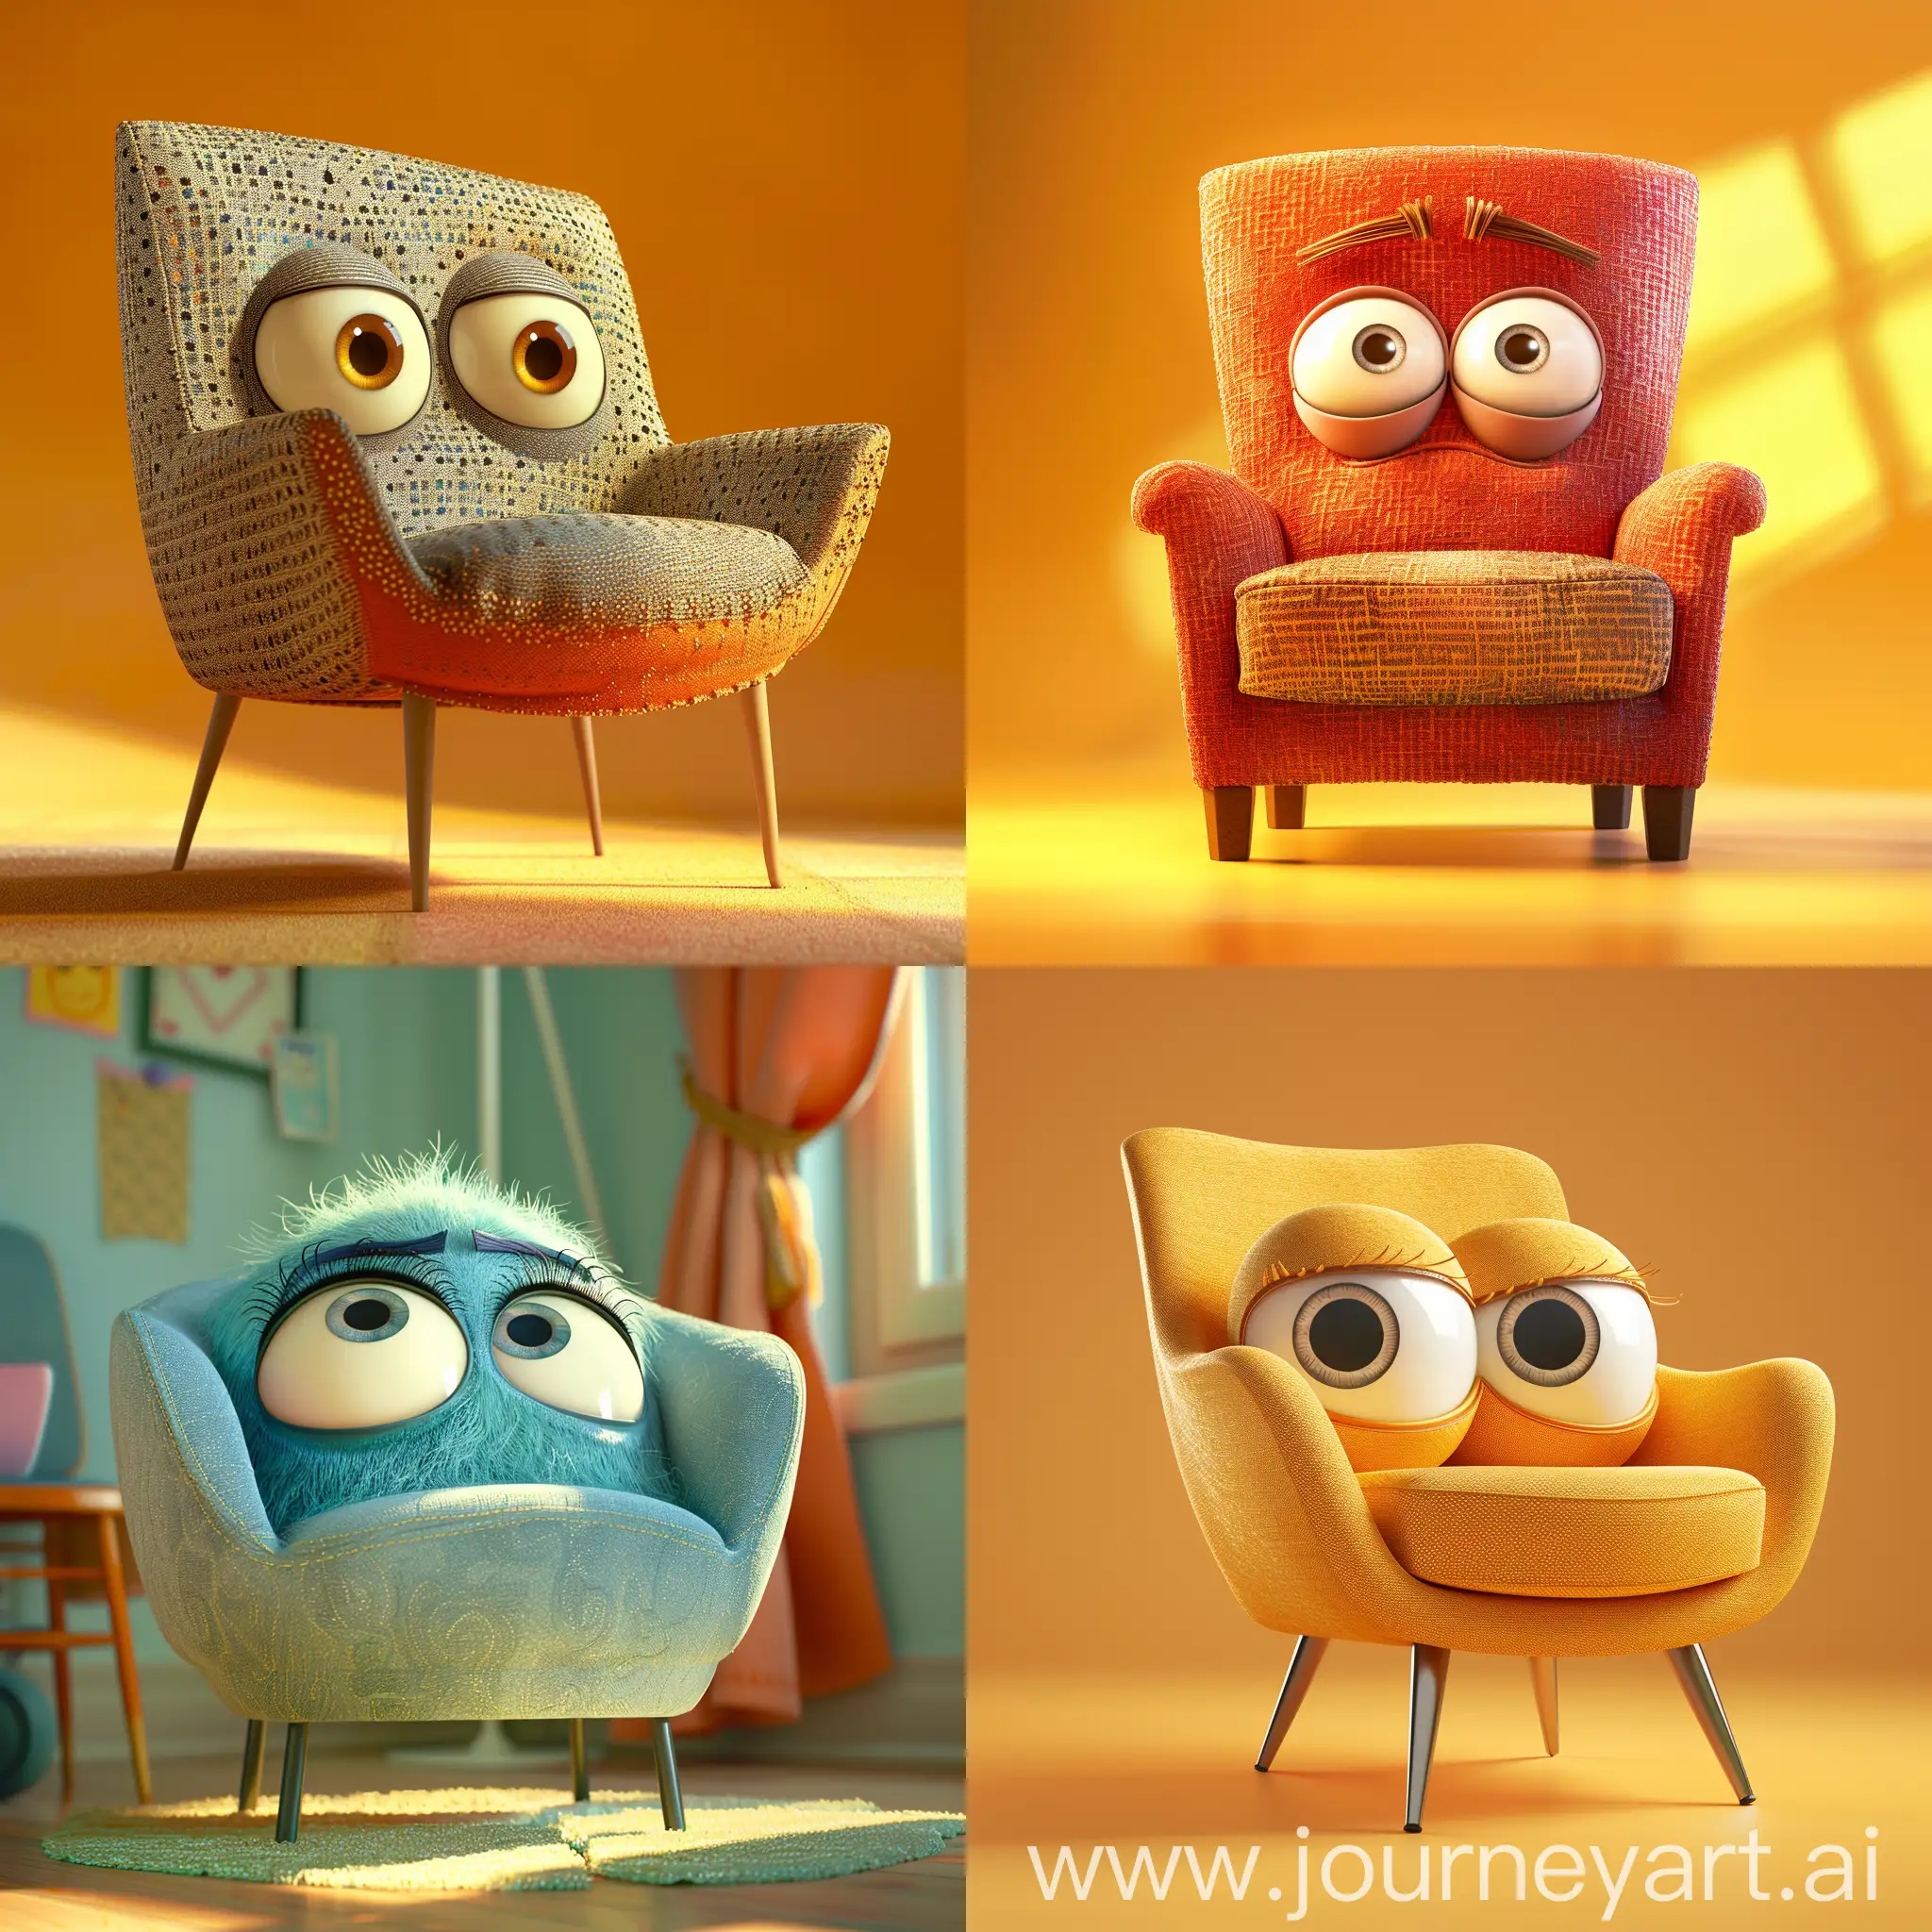 Animated-Pixar-Style-Chair-with-Expressive-Eyes-on-Bright-Background